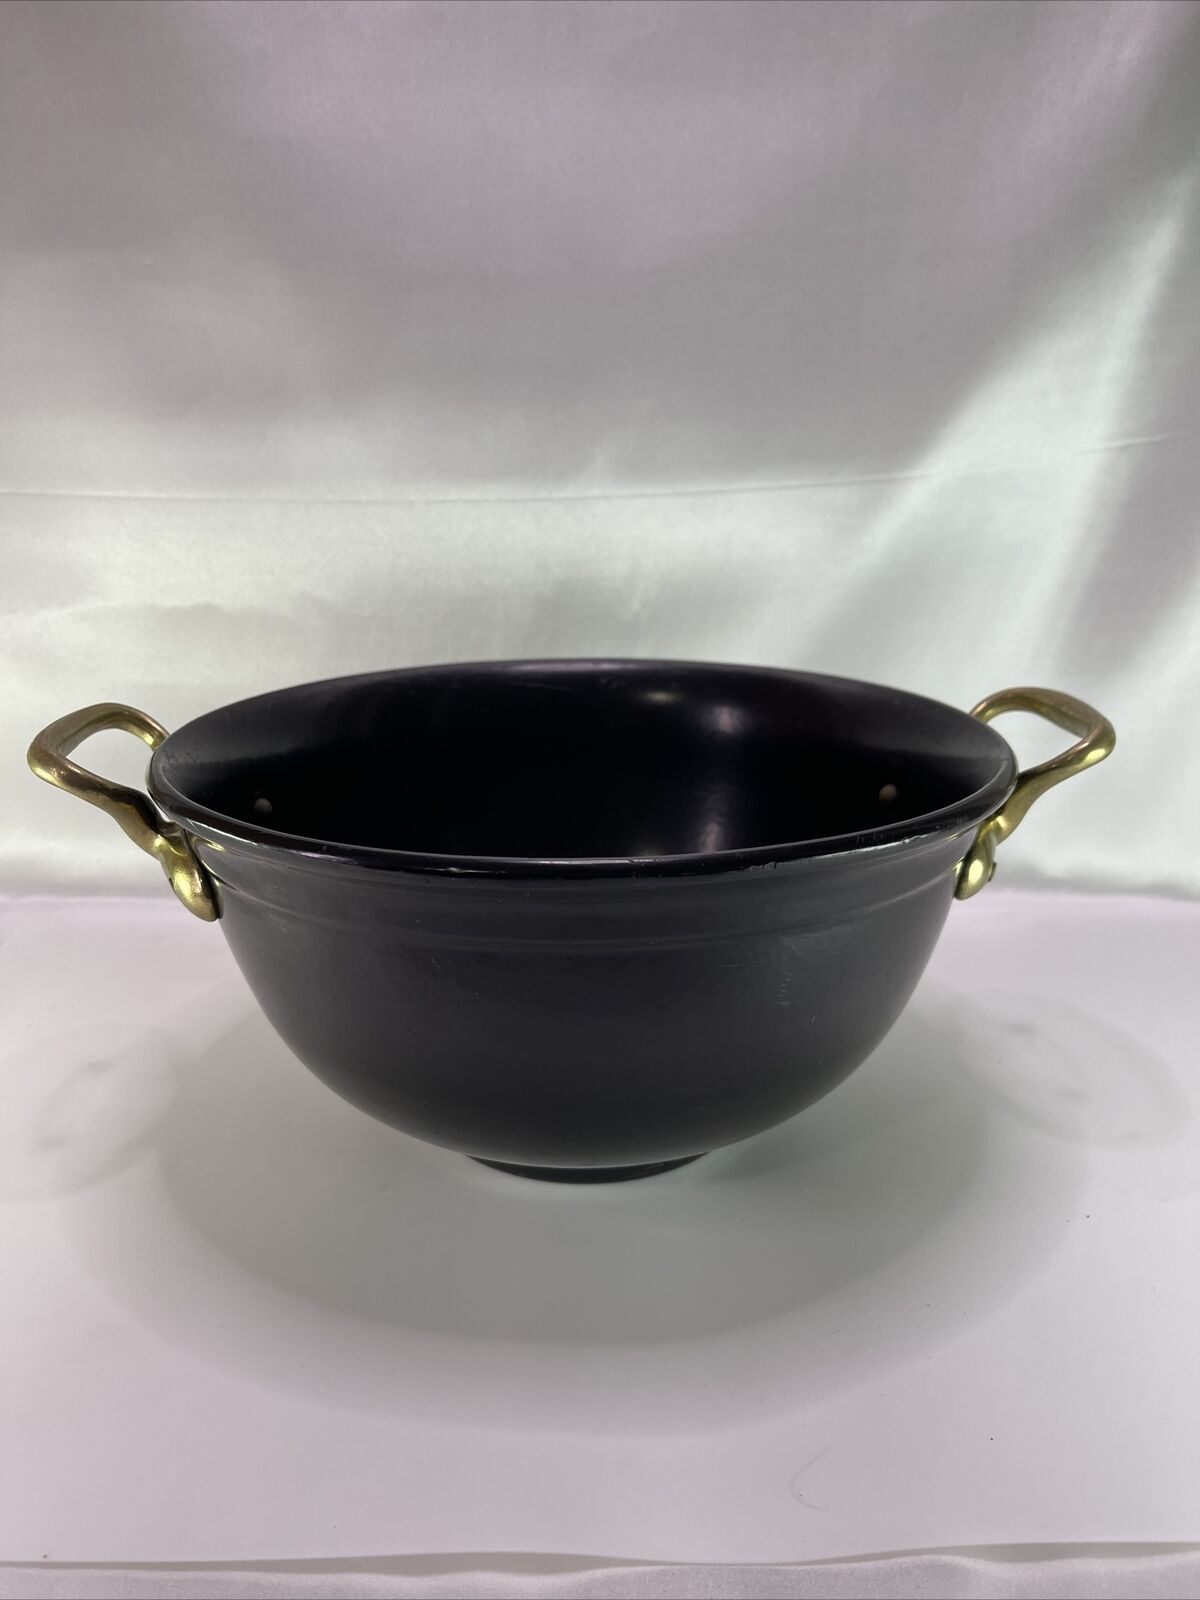 Bon Chef 9070 Black Bowl With Round Handles-Pewter Glo 4 Qt.